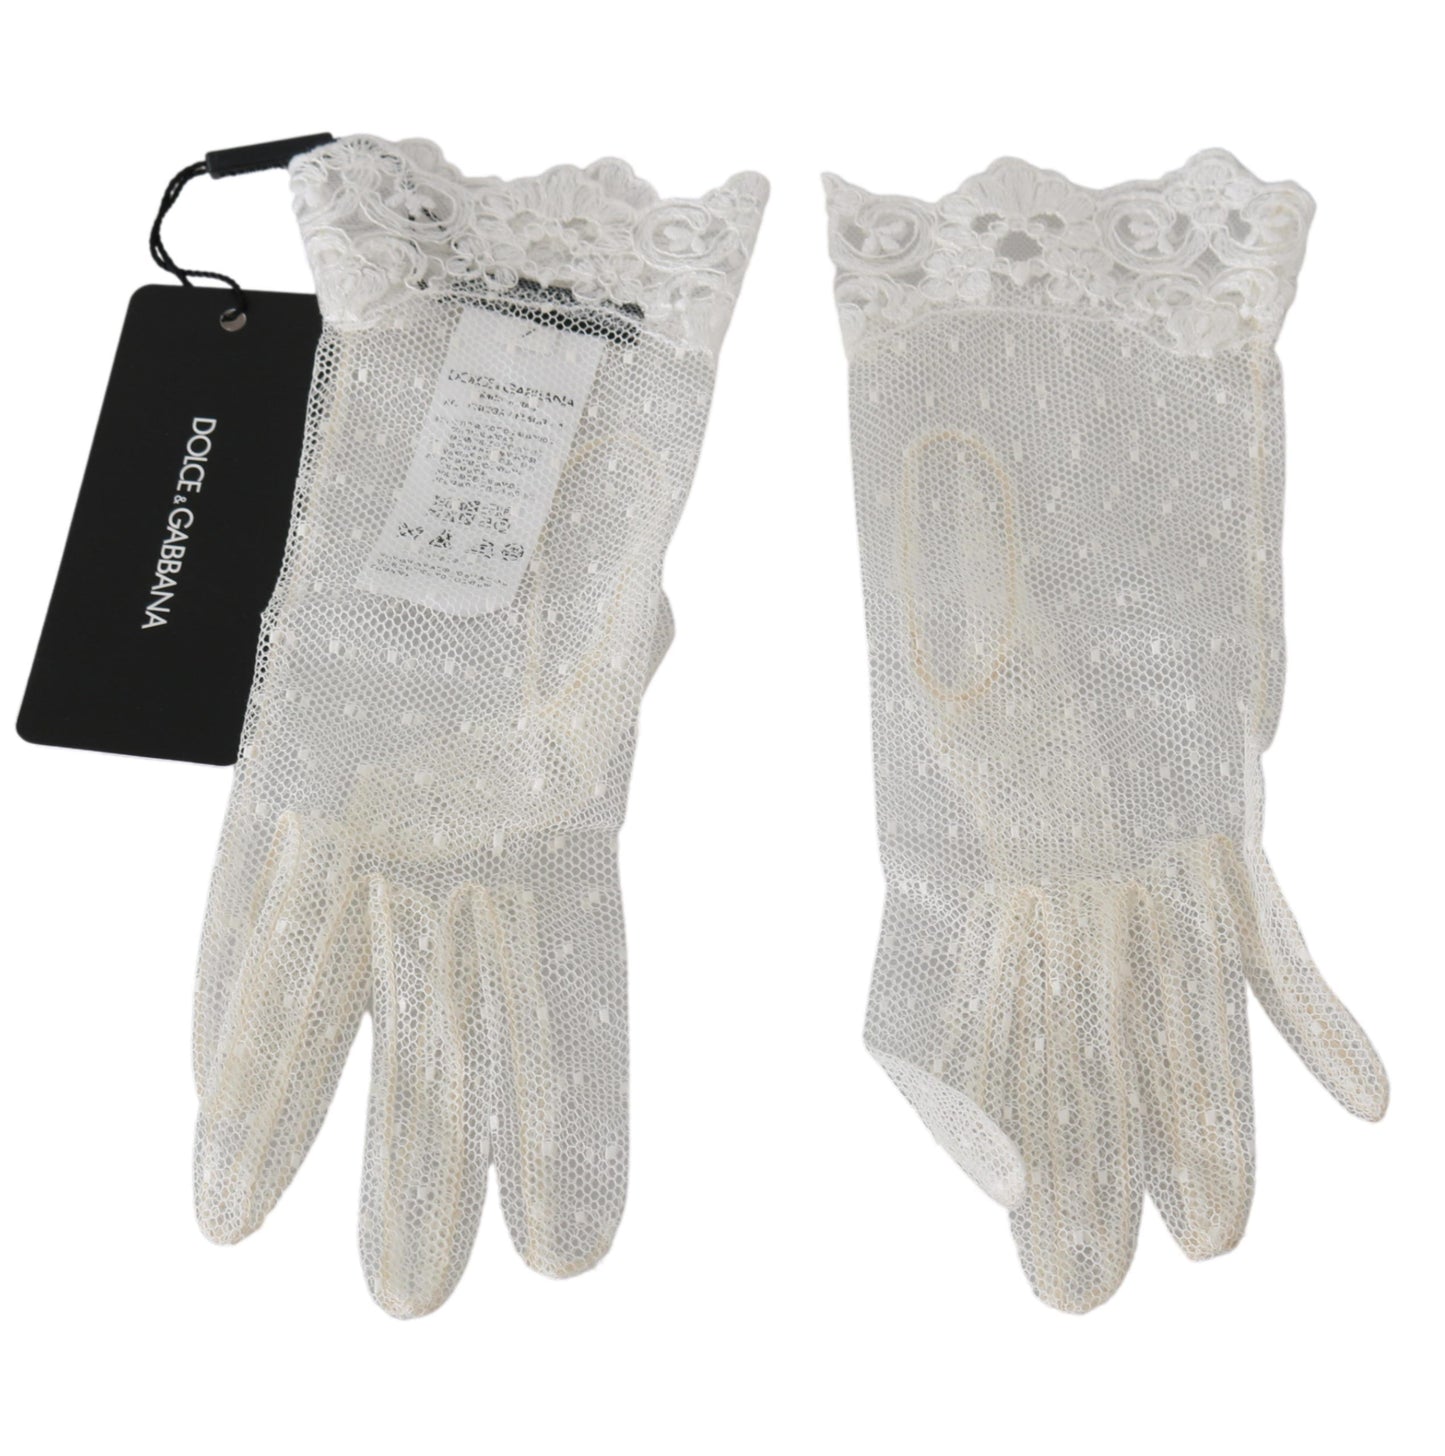 White Lace Wrist Length Mittens Cotton Gloves